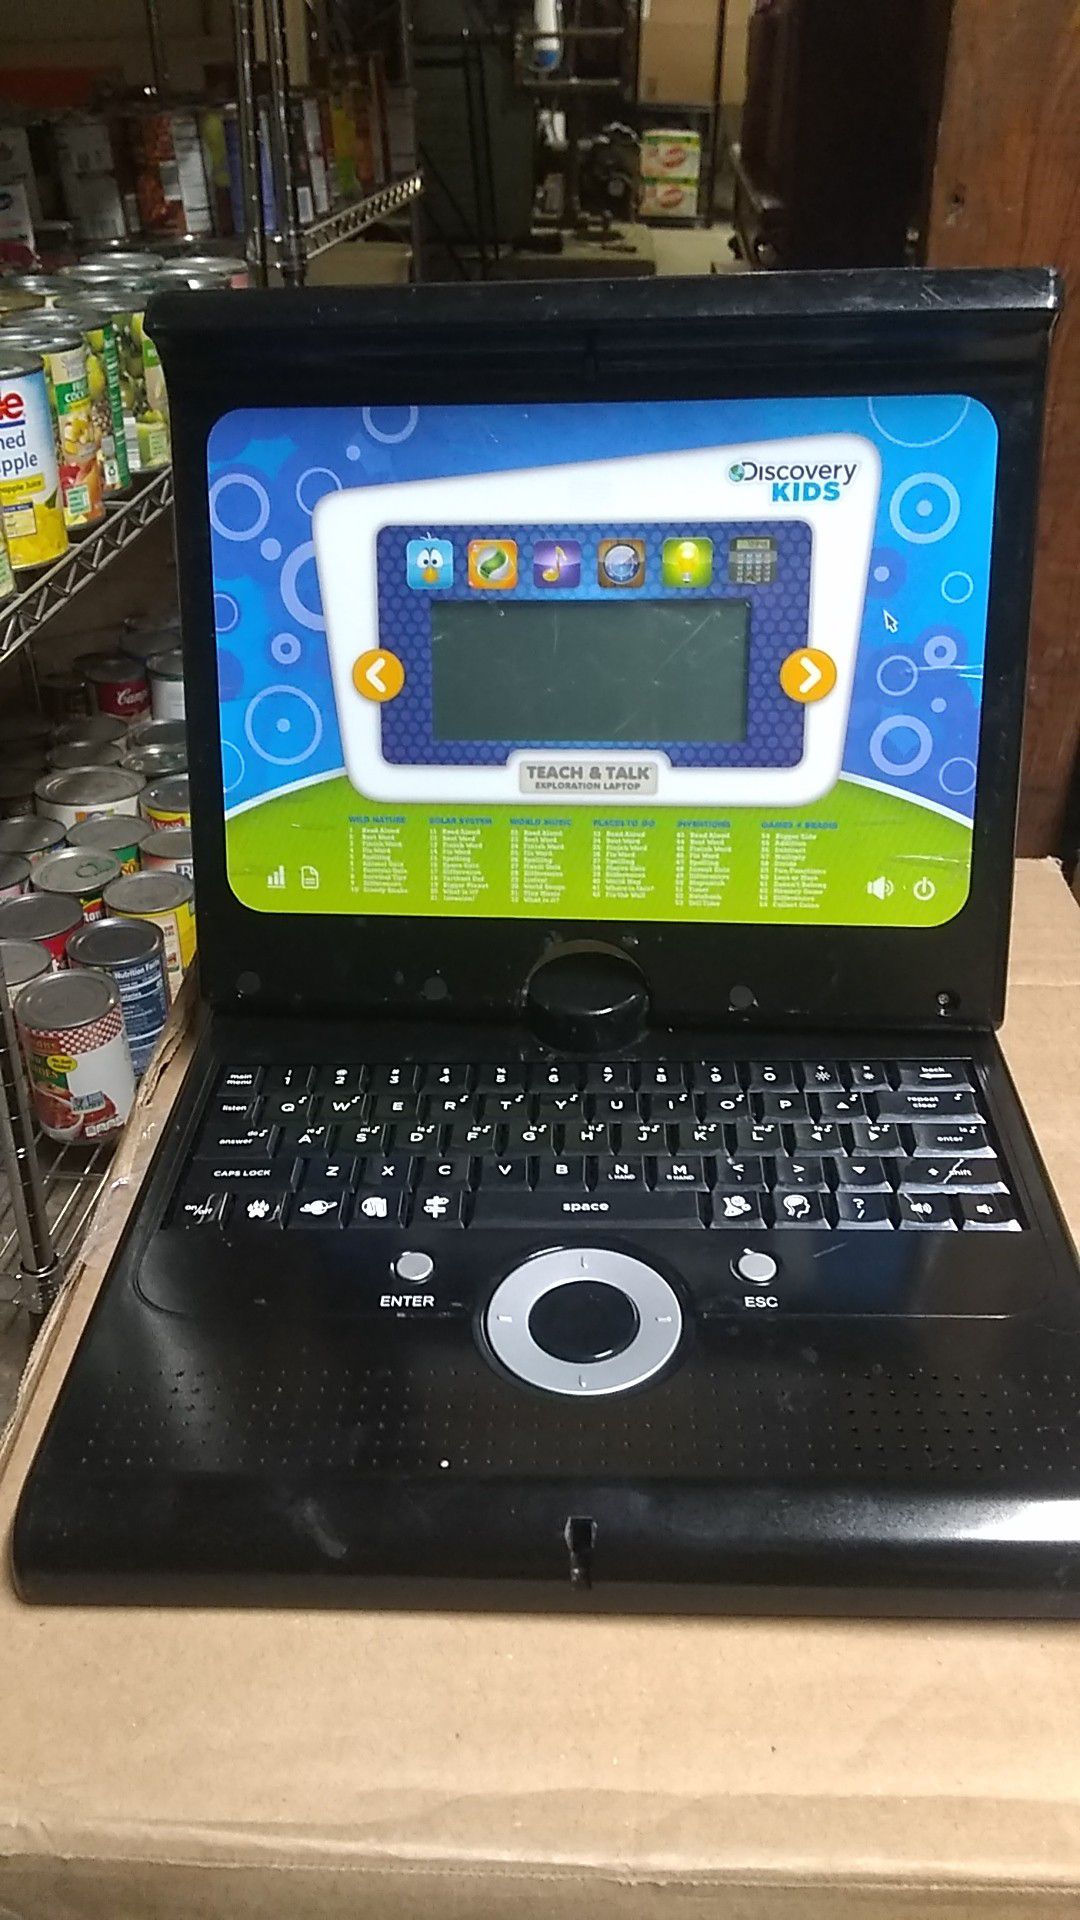 Discovey Kids Teach and Talk laptop